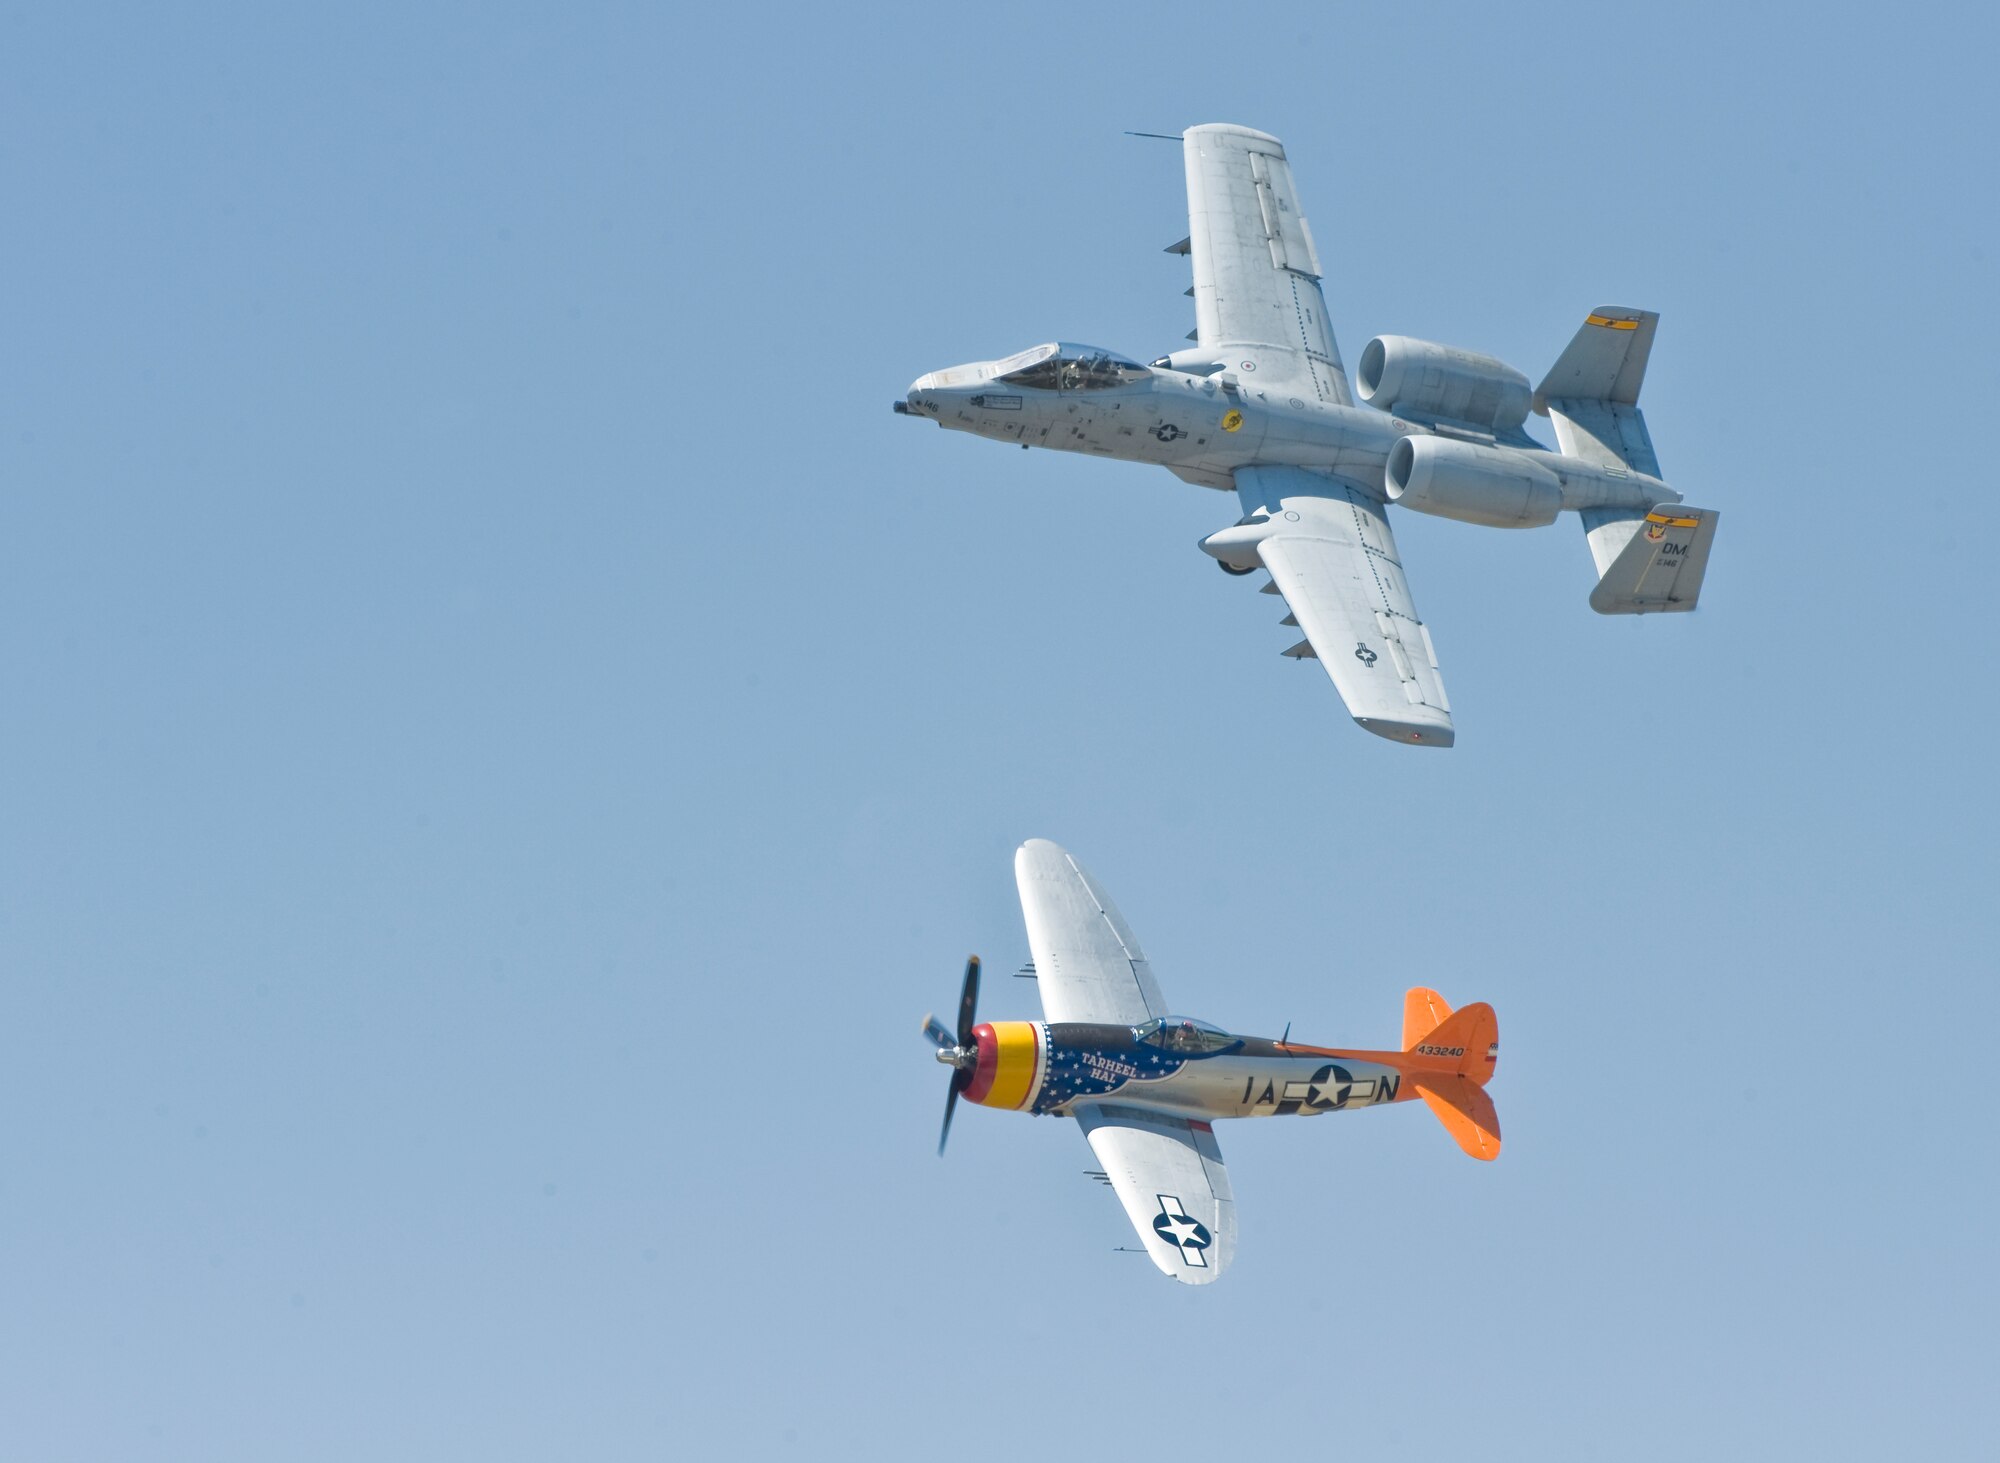 An A-10 Thunderbolt flies alongside a P-47 Thunderbolt during the Dyess Big Country Airfest April 28, 2012, at Dyess Air Force Base, Texas. The airfest displayed over 30 static aircrafts while also showcasing a B-2 Spirit, B-17, B-25 and many more. (U.S. Air Force photo by Airman 1st Class Jonathan Stefanko/ Released)